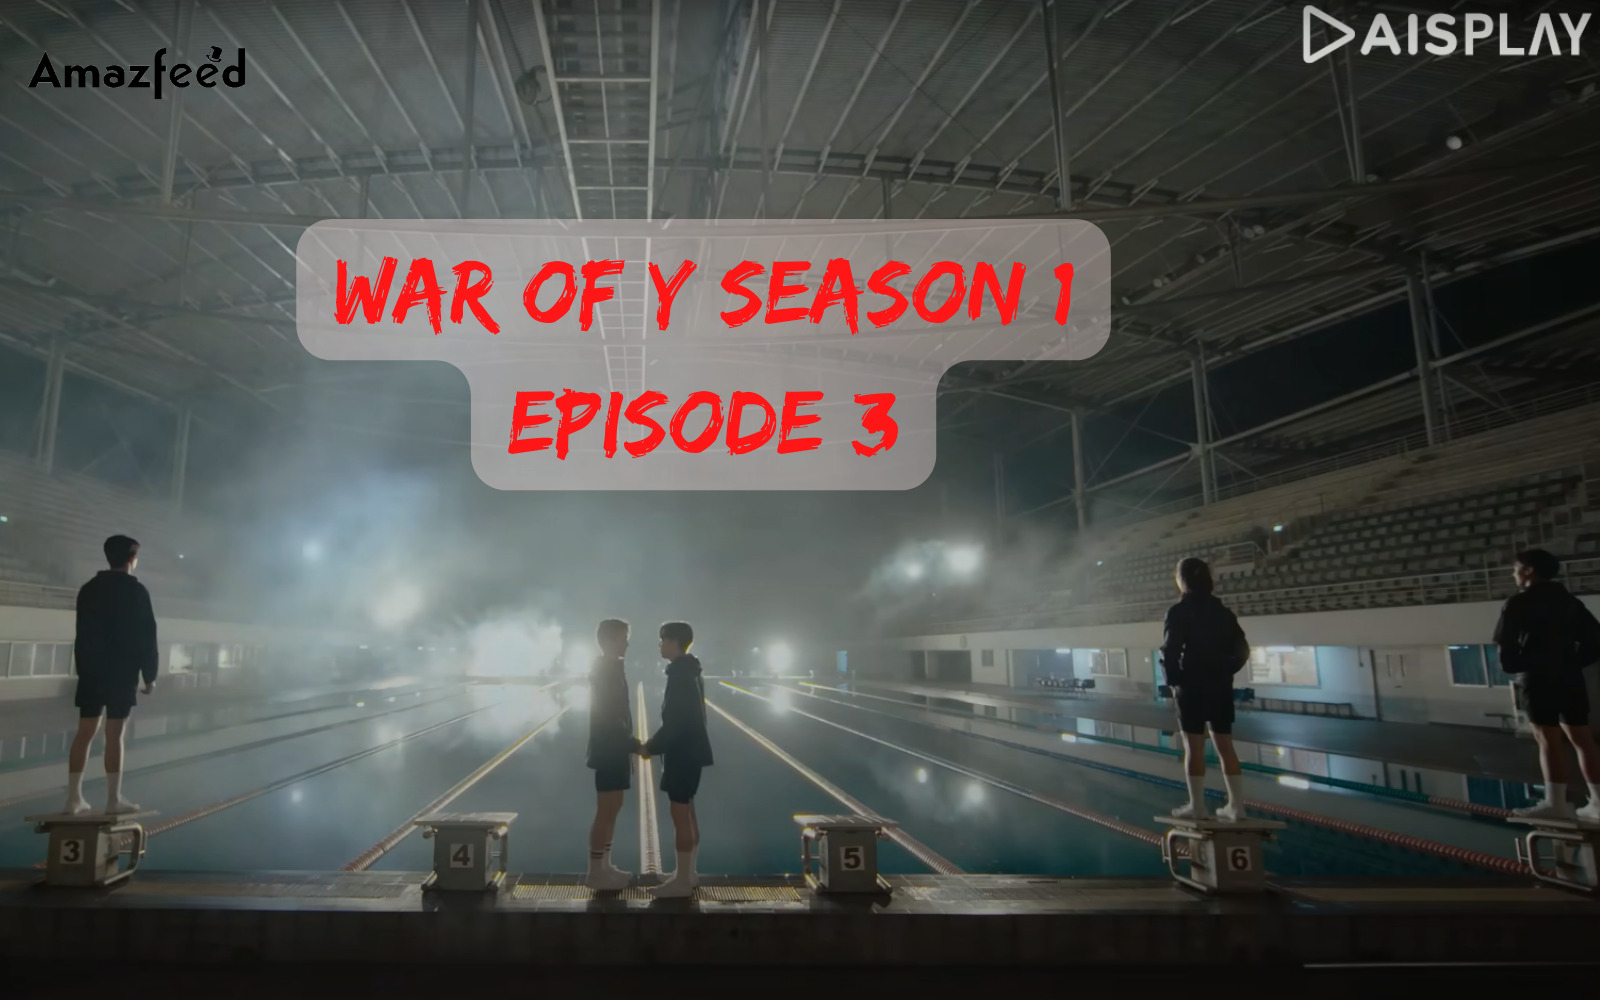 When Is War of Y season 1 Episode 3 Coming Out (Release Date)